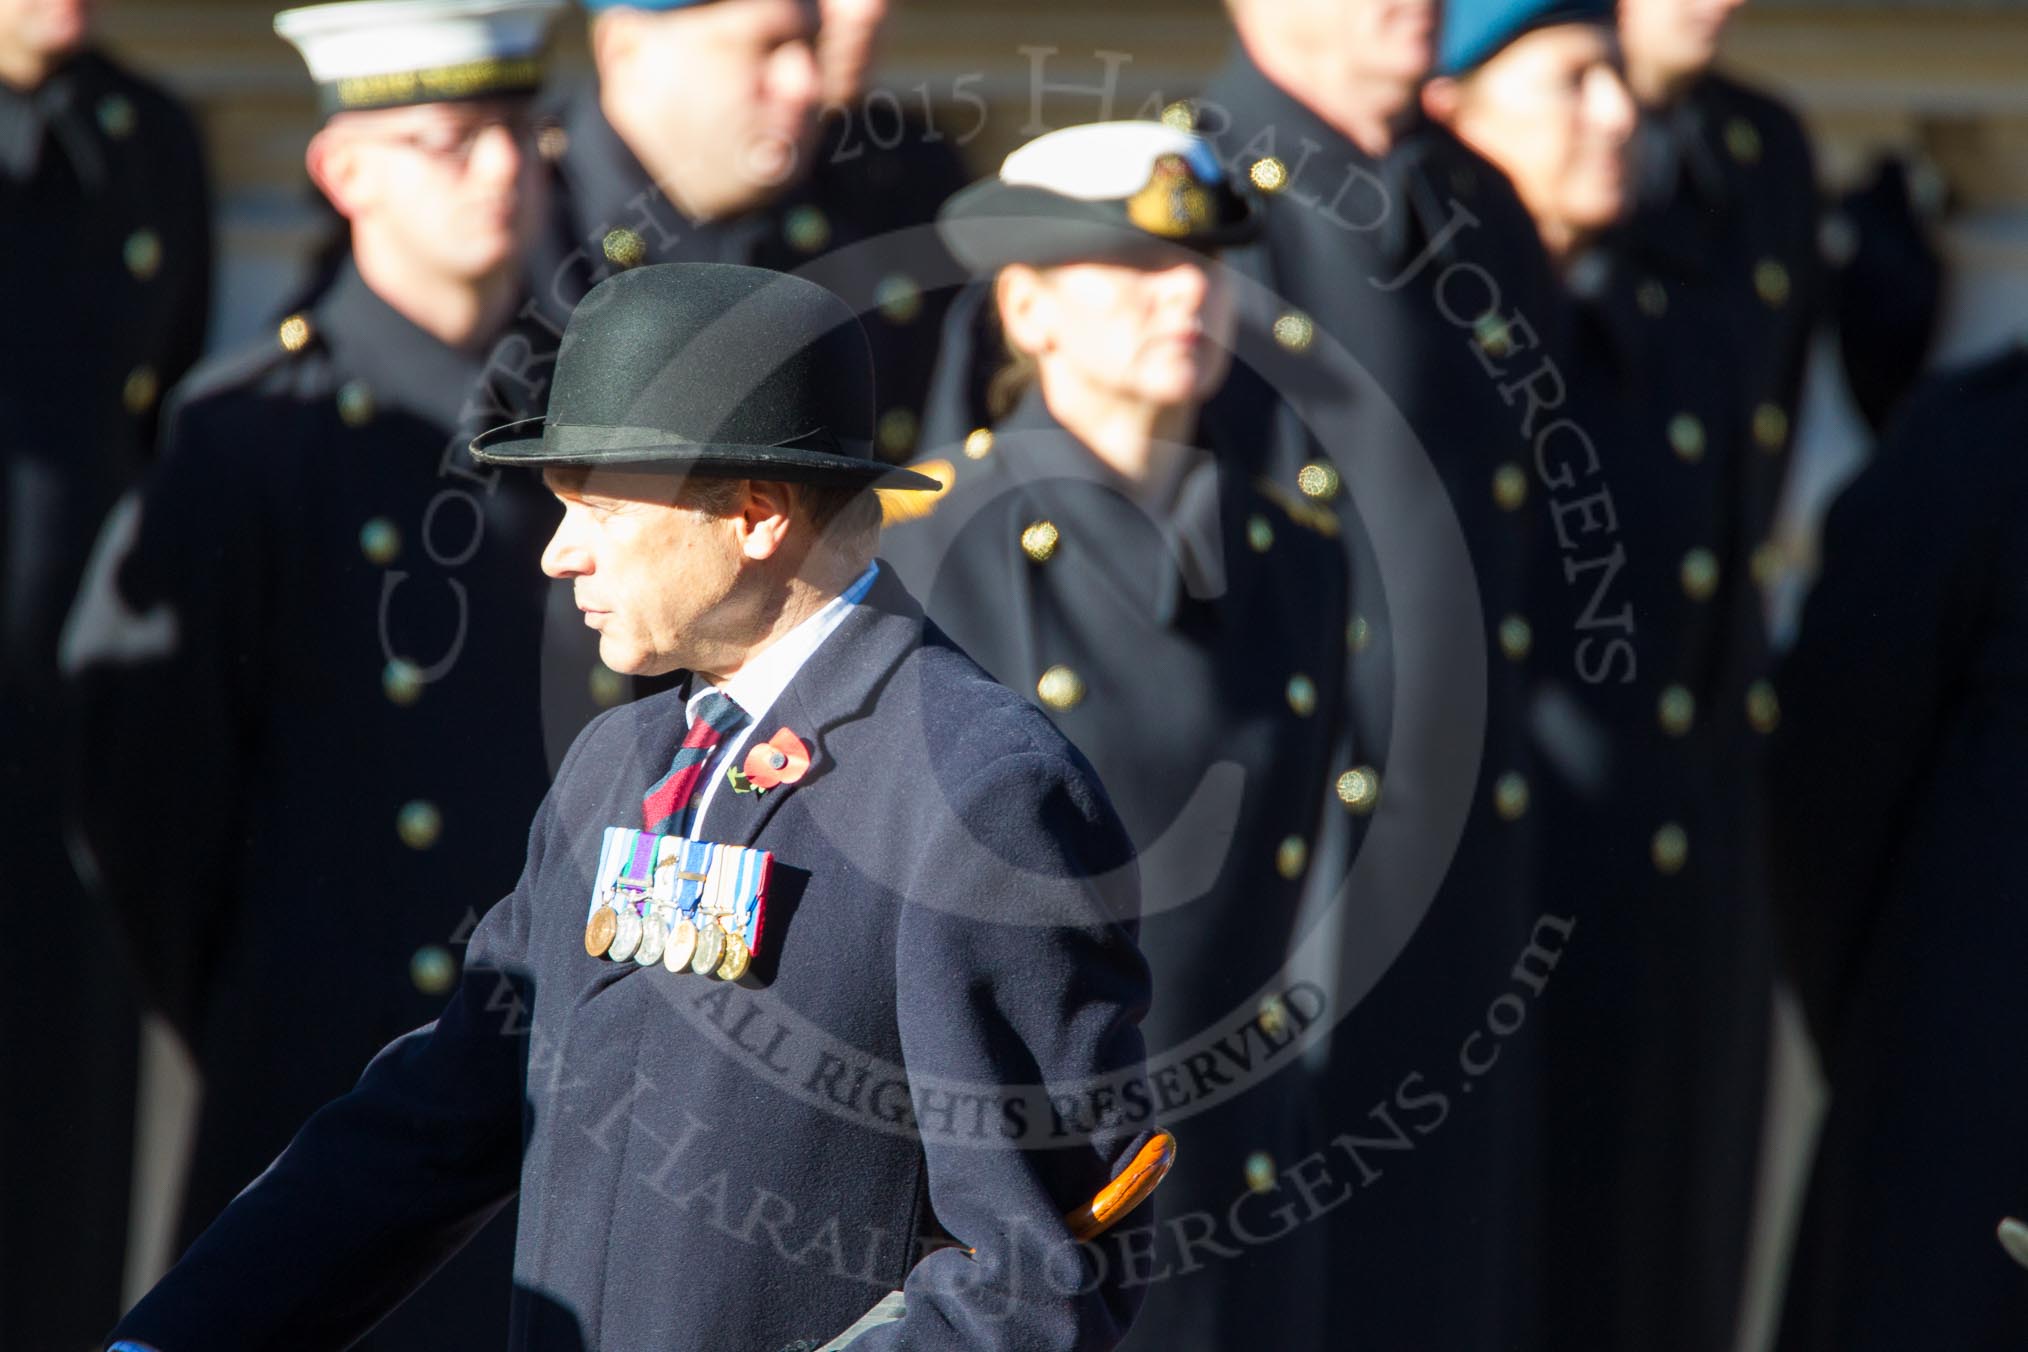 Remembrance Sunday Cenotaph March Past 2013: D32 - Gold Star and Garter with 48 marchers..
Press stand opposite the Foreign Office building, Whitehall, London SW1,
London,
Greater London,
United Kingdom,
on 10 November 2013 at 11:43, image #301